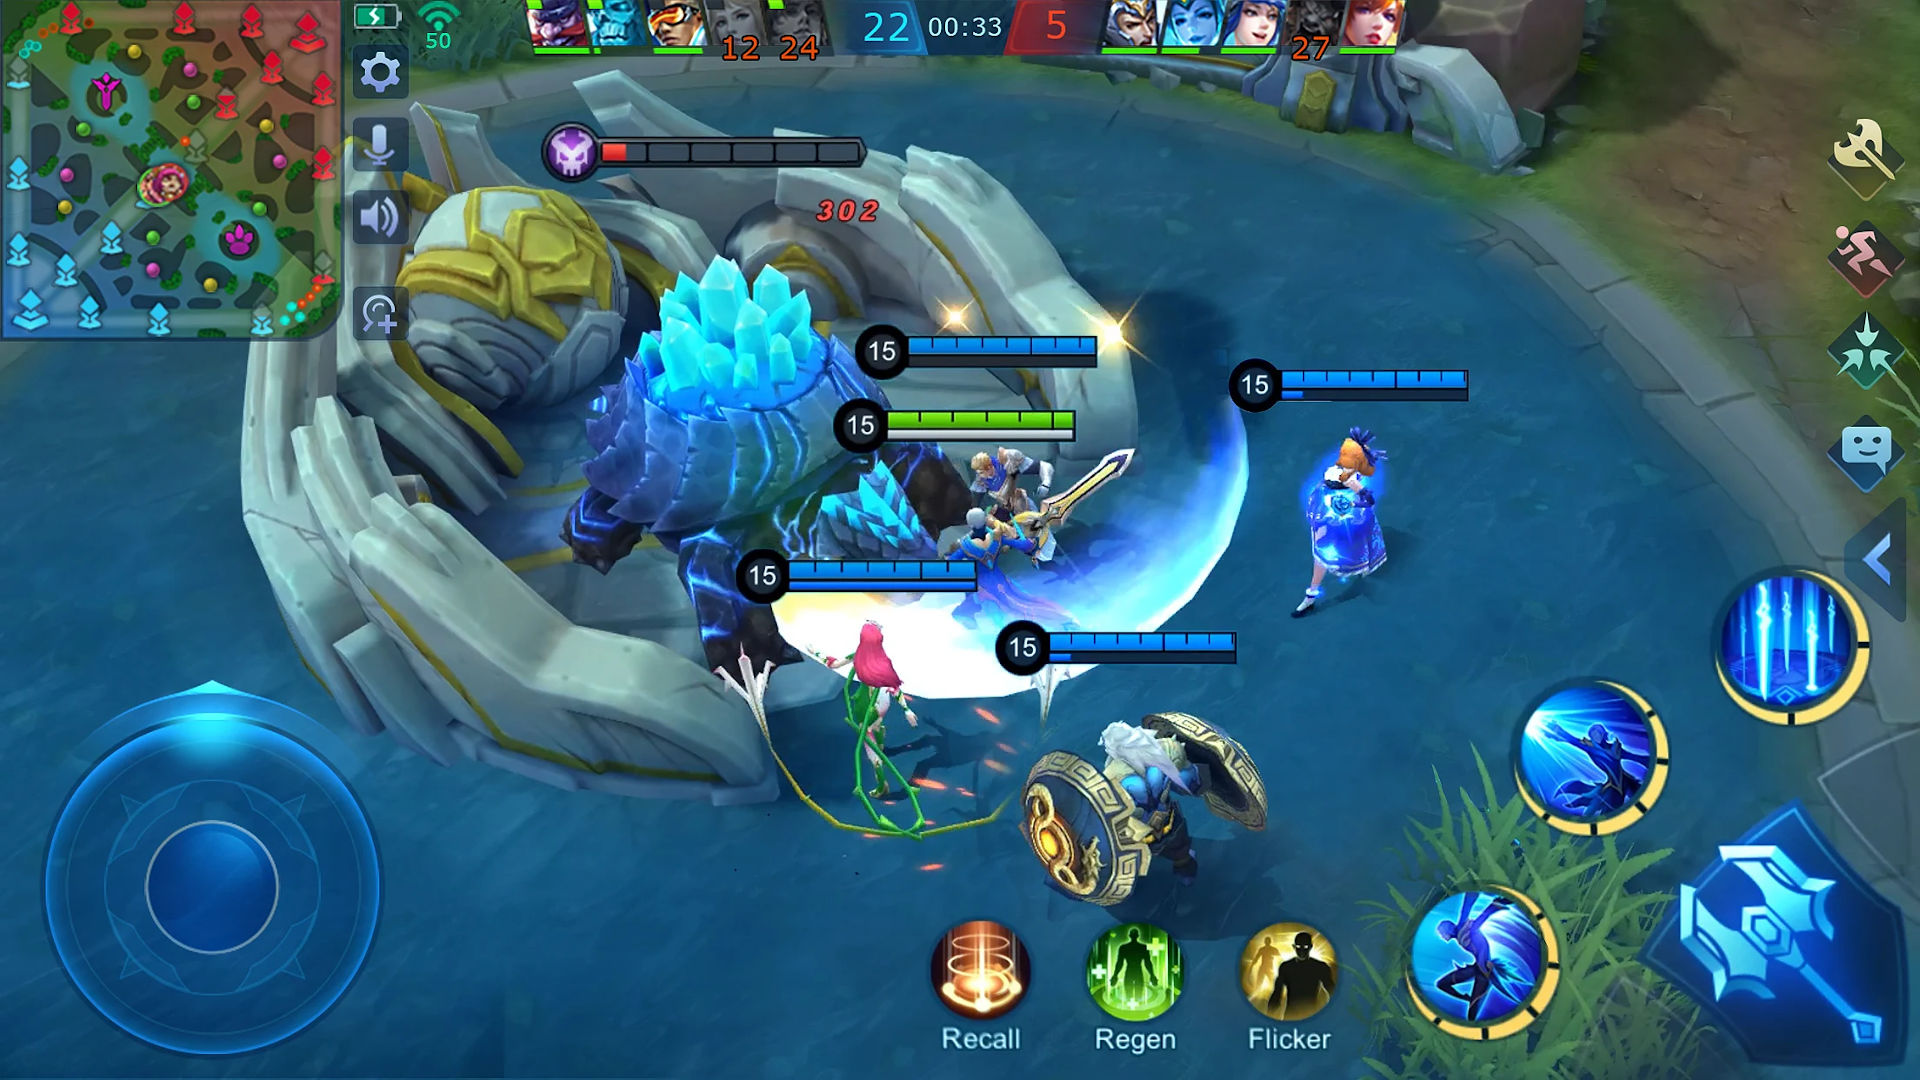 A screenshot of a game of Mobile Legends Bang Bang with the VPN settings showing on the top right corner of the screen.